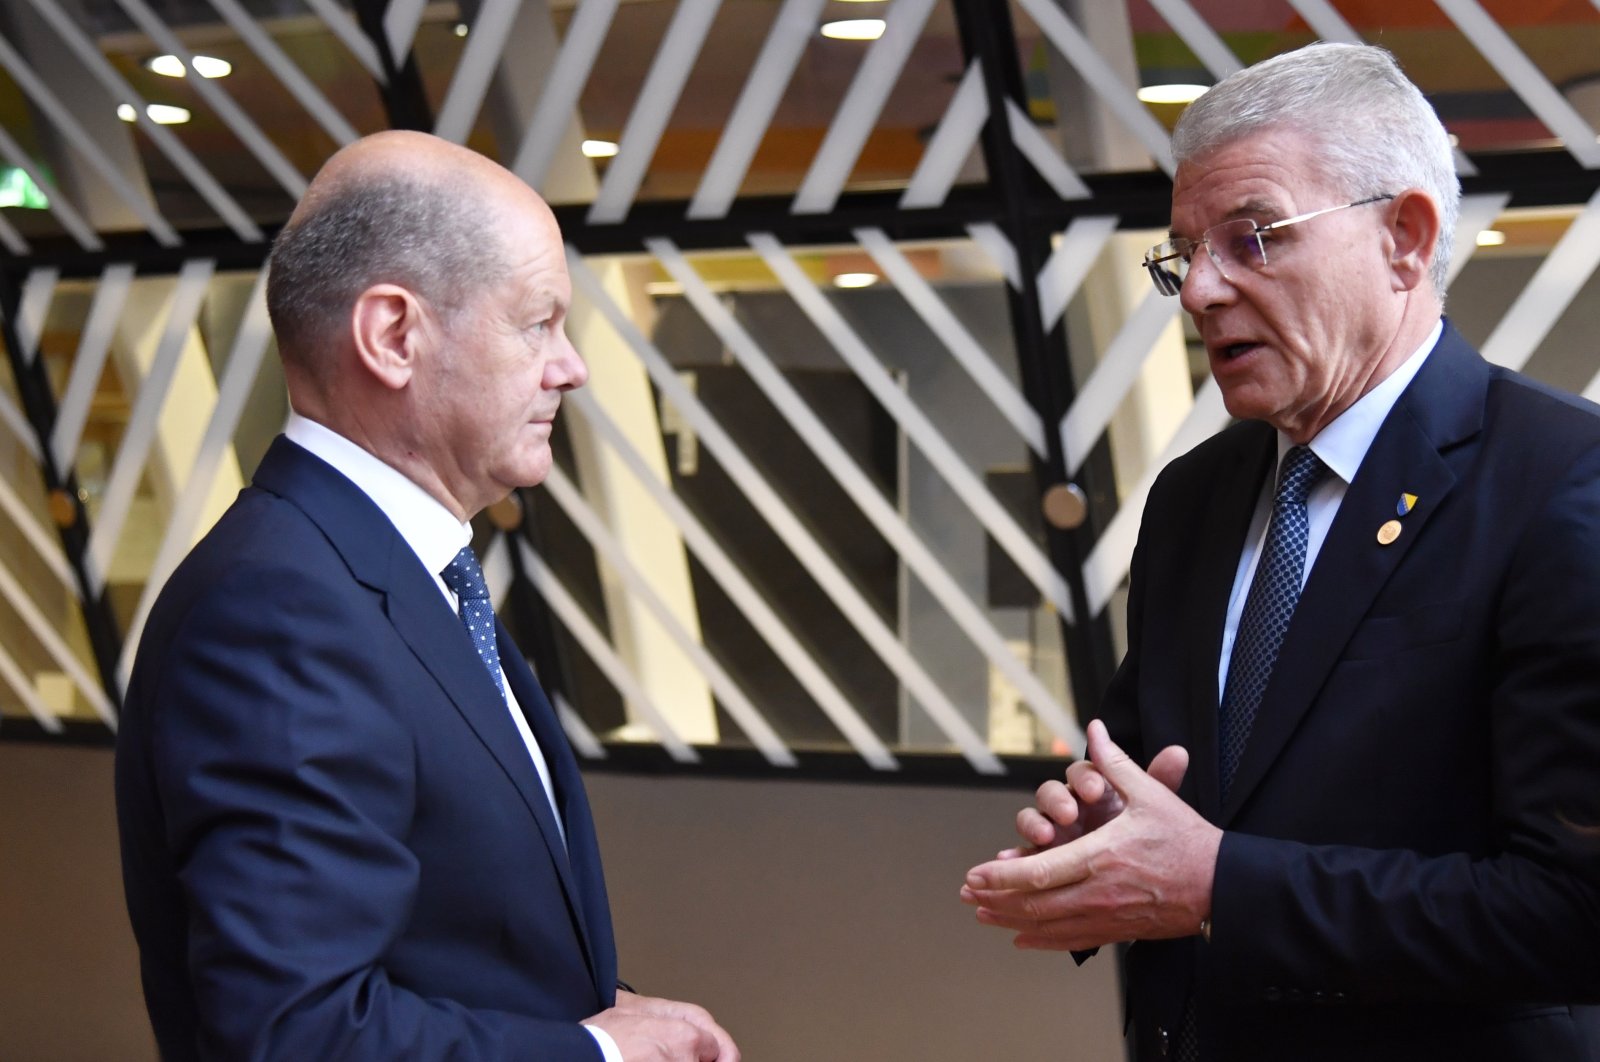 German Chancellor Olaf Scholz (L) speaks with the Chairperson of the Presidency of Bosnia-Herzegovina Sefik Dzaferovic during a bilateral meeting on the sidelines of an EU summit in Brussels, Belgium, June 23, 2022. (EPA Photo)